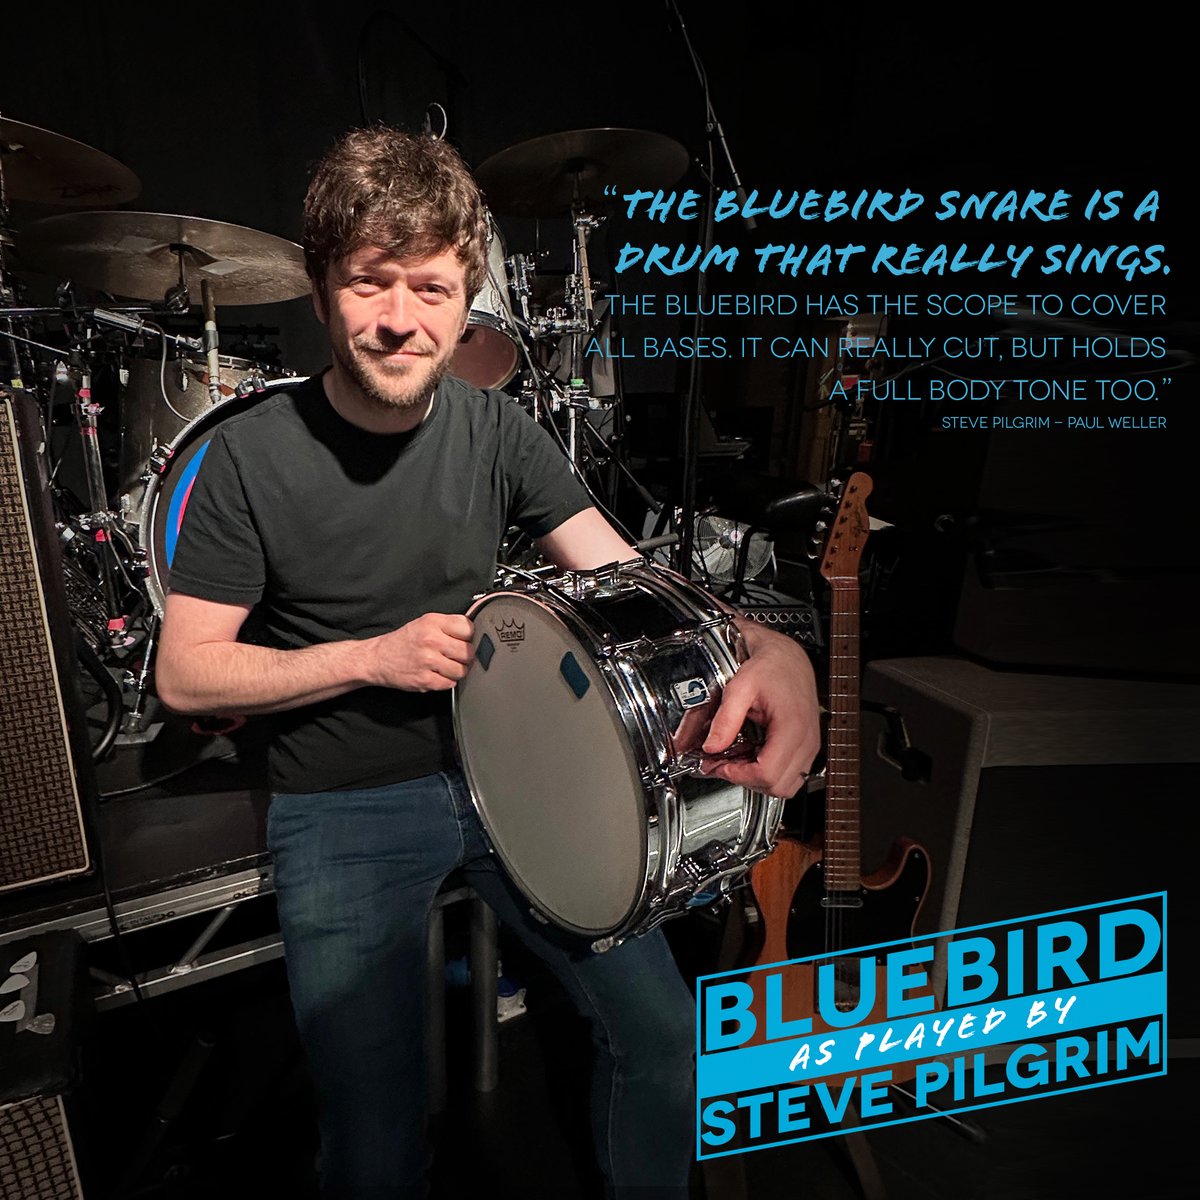 “On the shows I play there is a lot of musical ground and genres covered. The Bluebird has the scope to cover all bases. It can really cut, but holds a full body tone too. The Bluebird snare is a drum that really sings.” - @Mr_StevePilgrim, @paulwellerHQ #britishdrumco